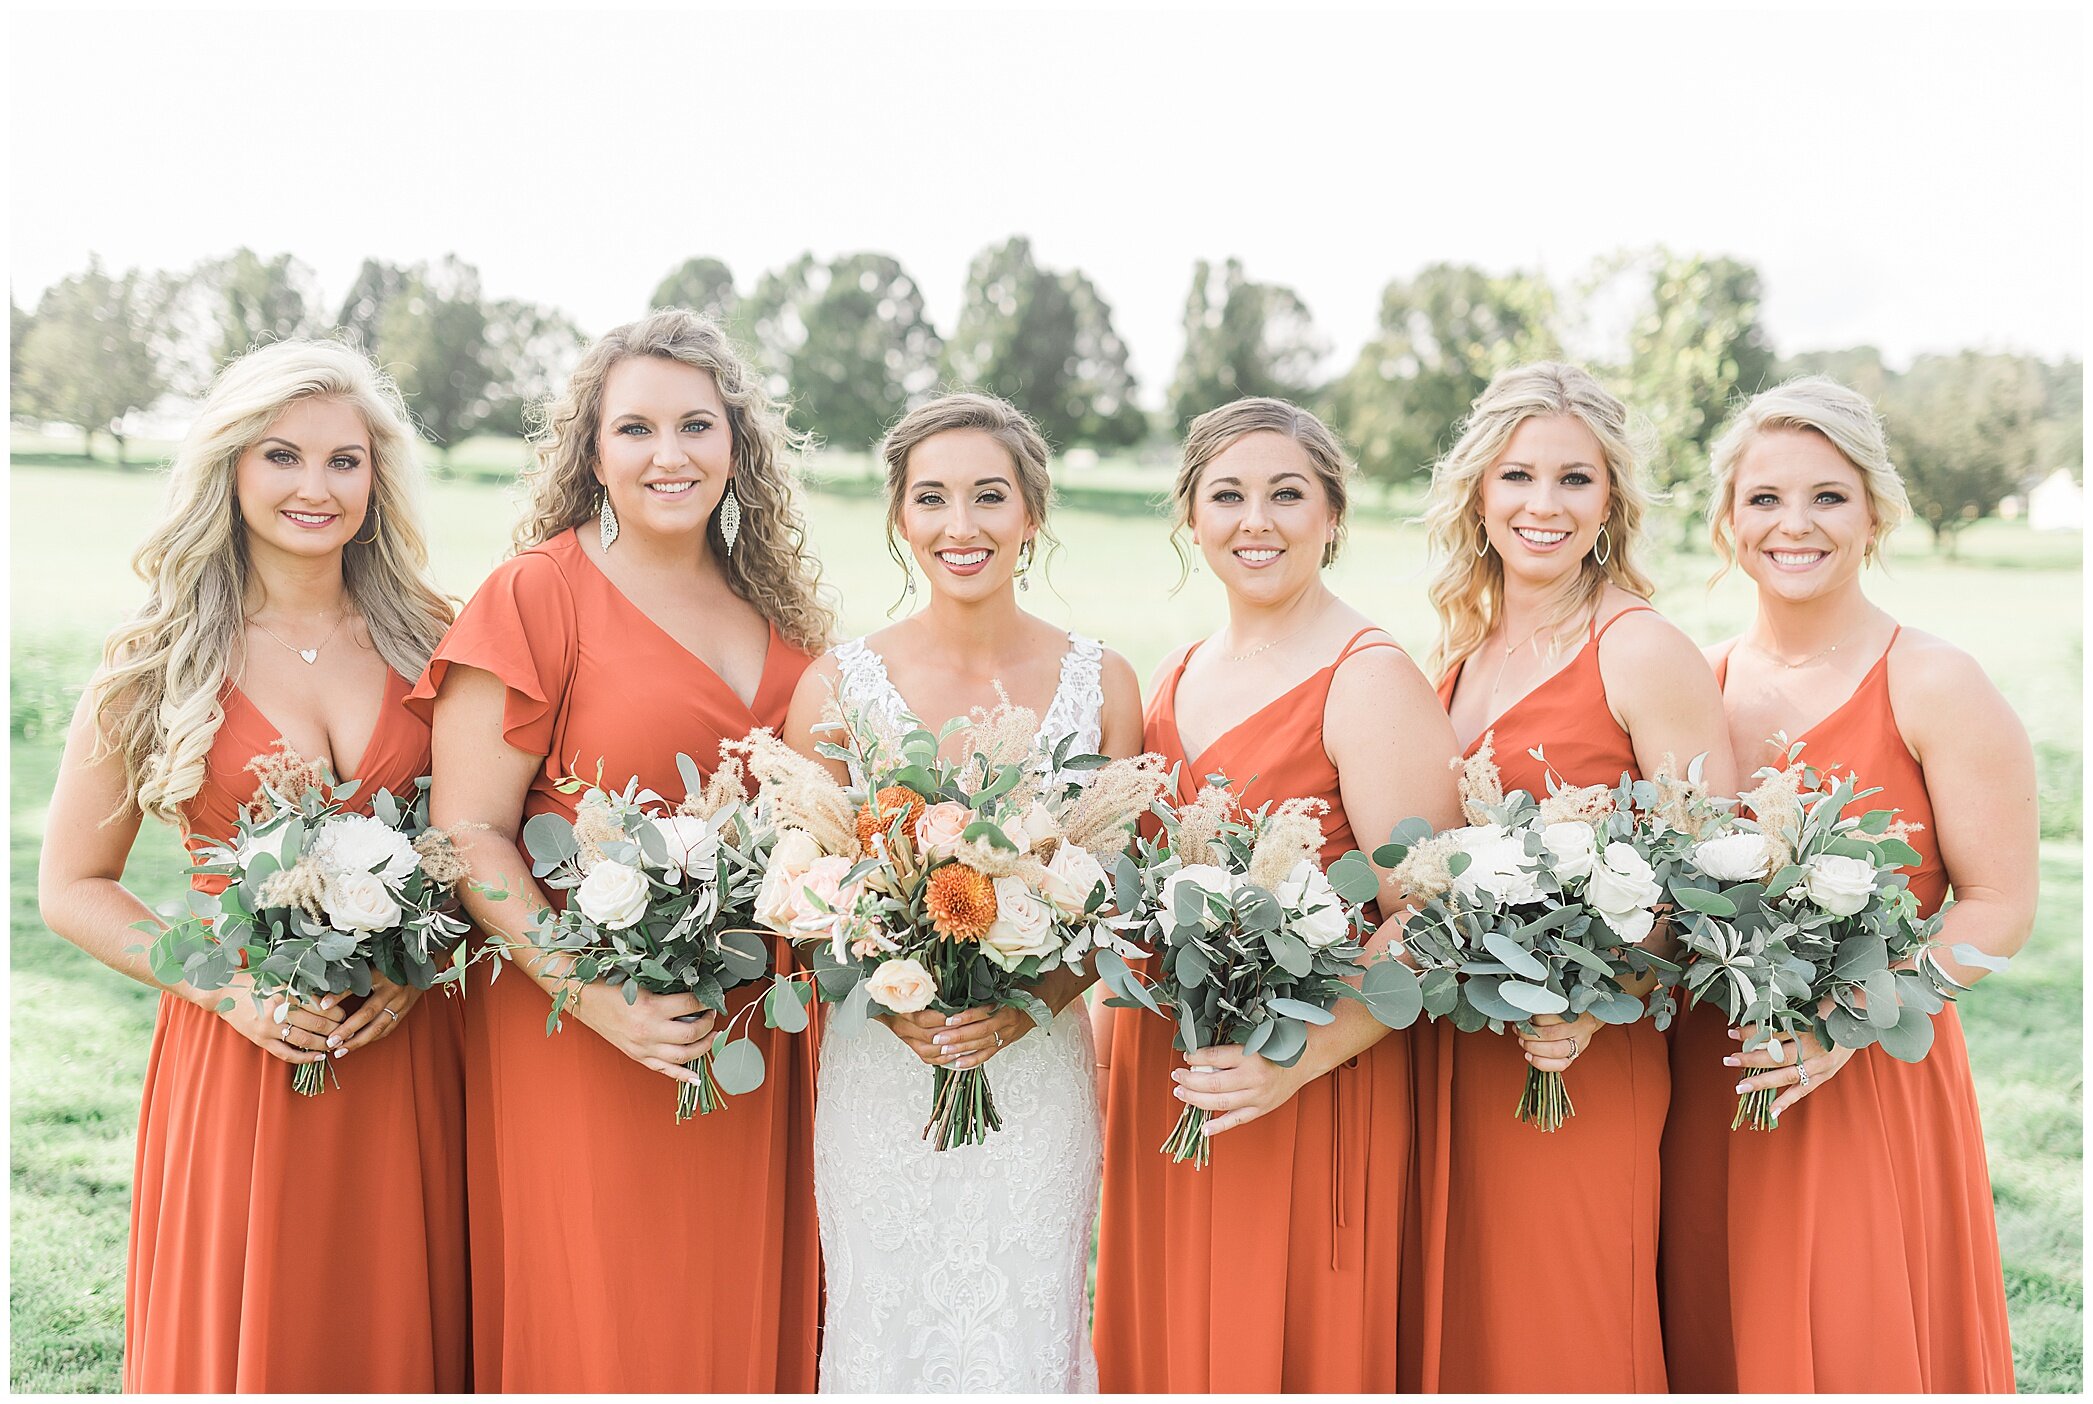 bride poses with 5 bridesmaids in orange gowns